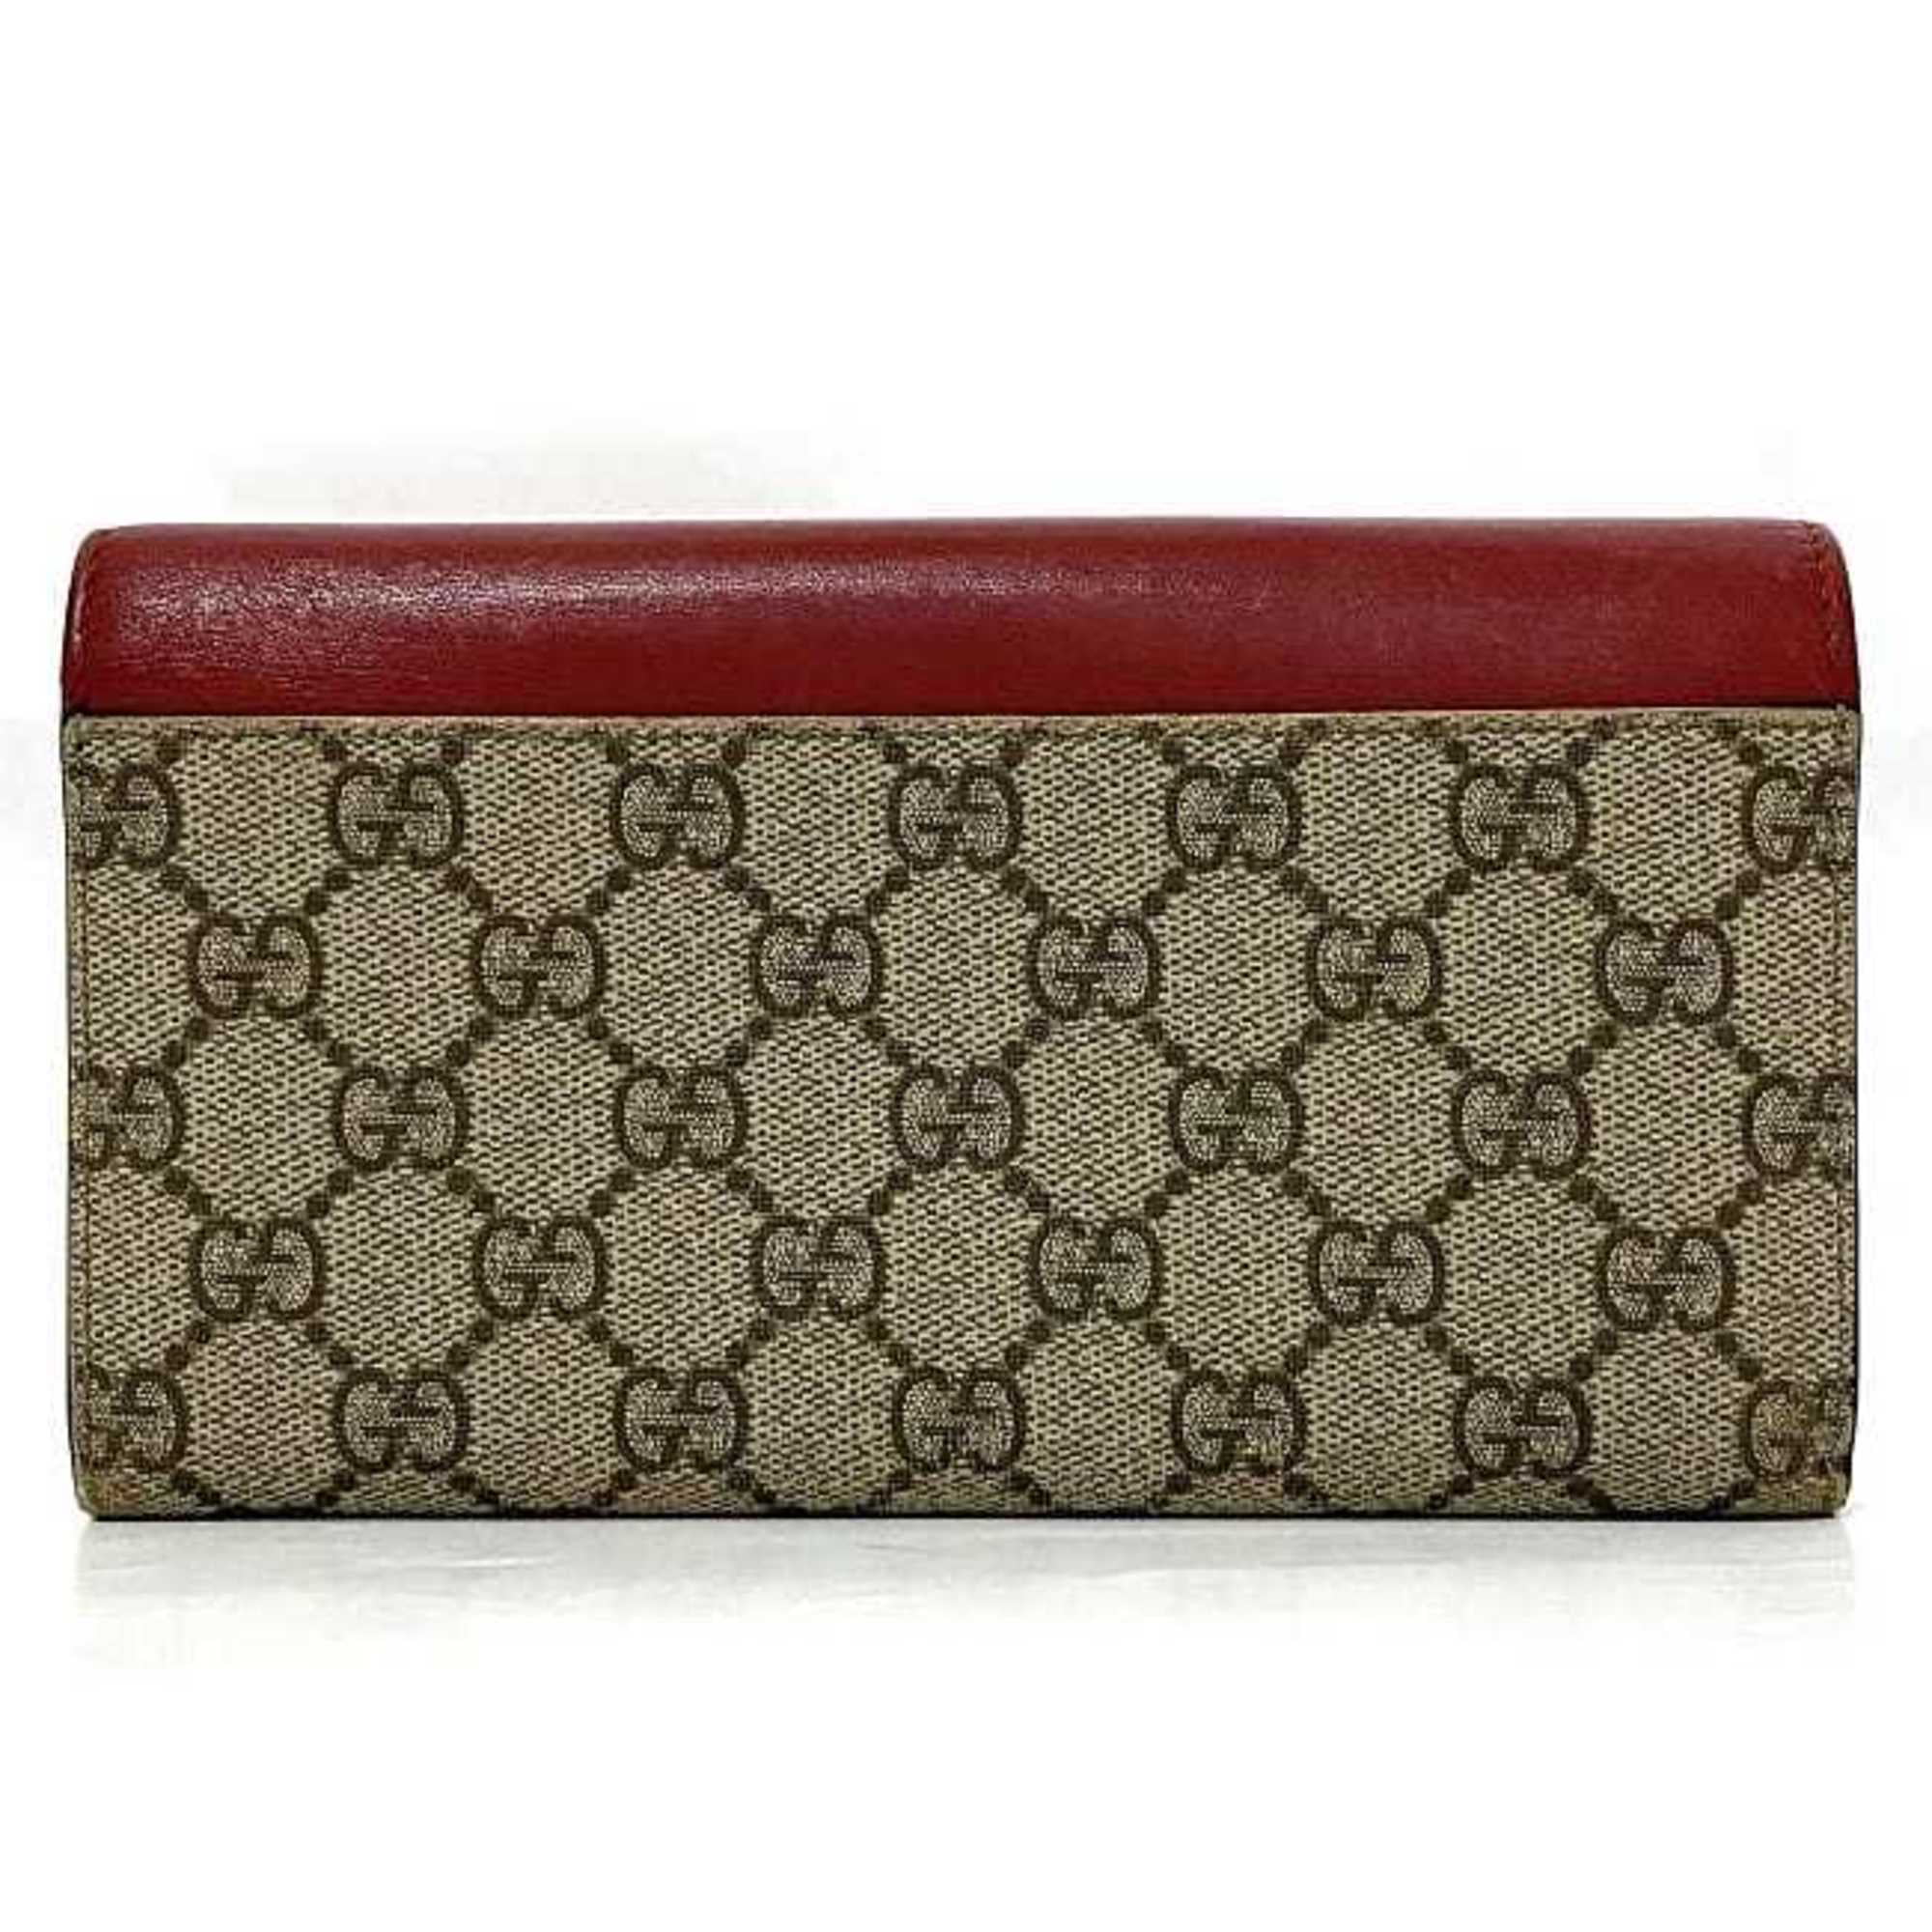 Gucci Red Guccissima Leather Flap Continental Wallet